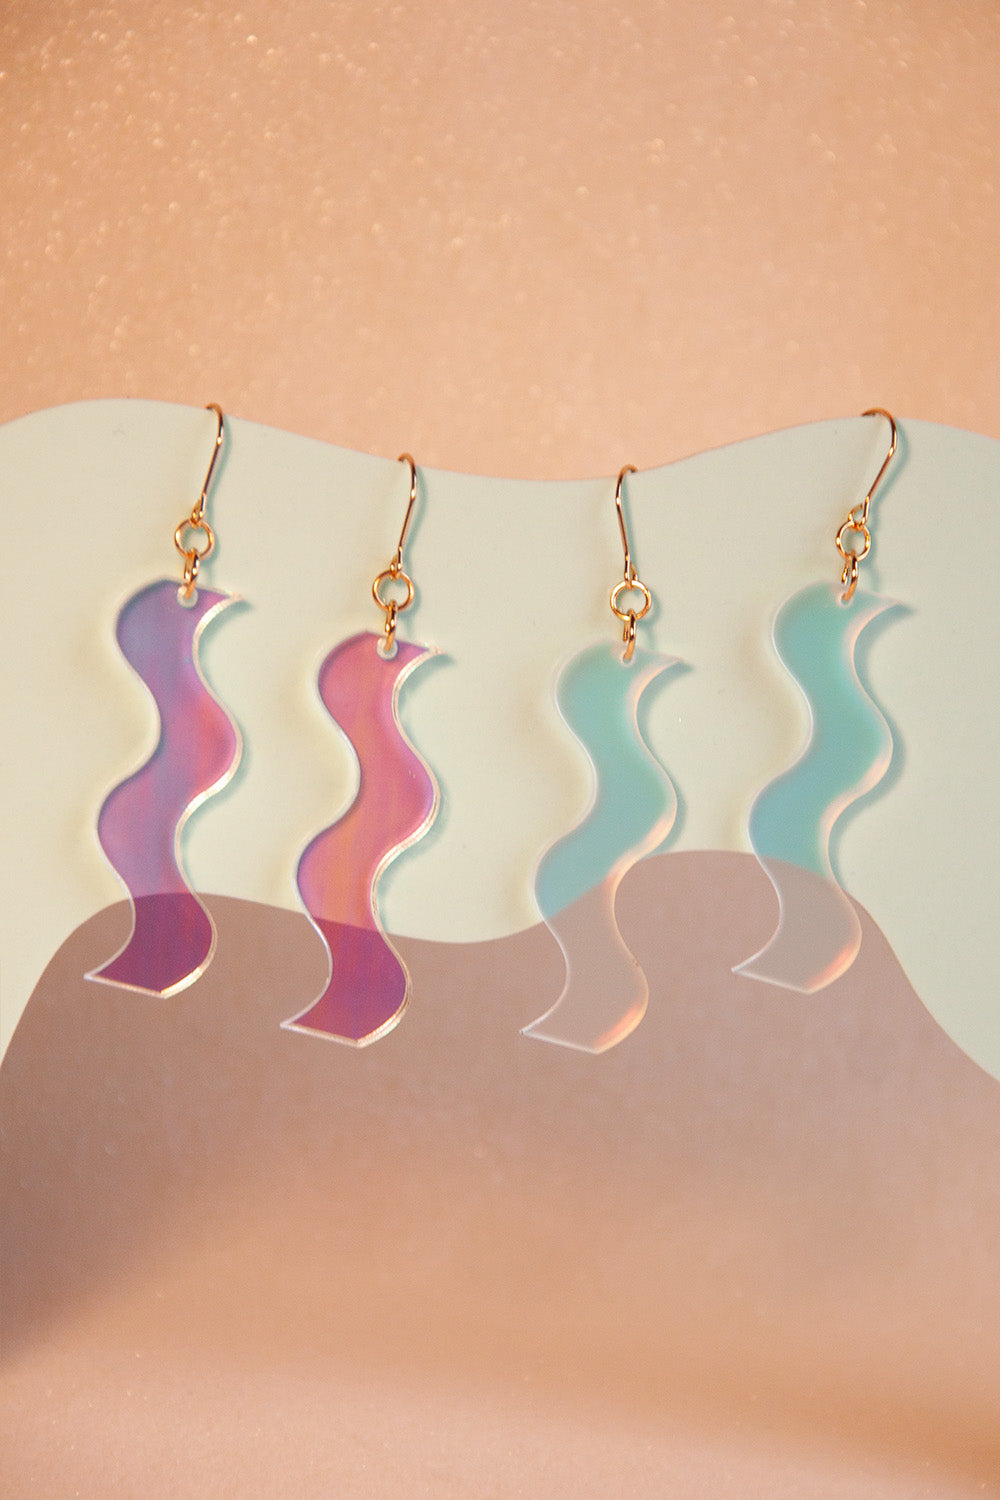 Squiggle earrings in matte iridescent